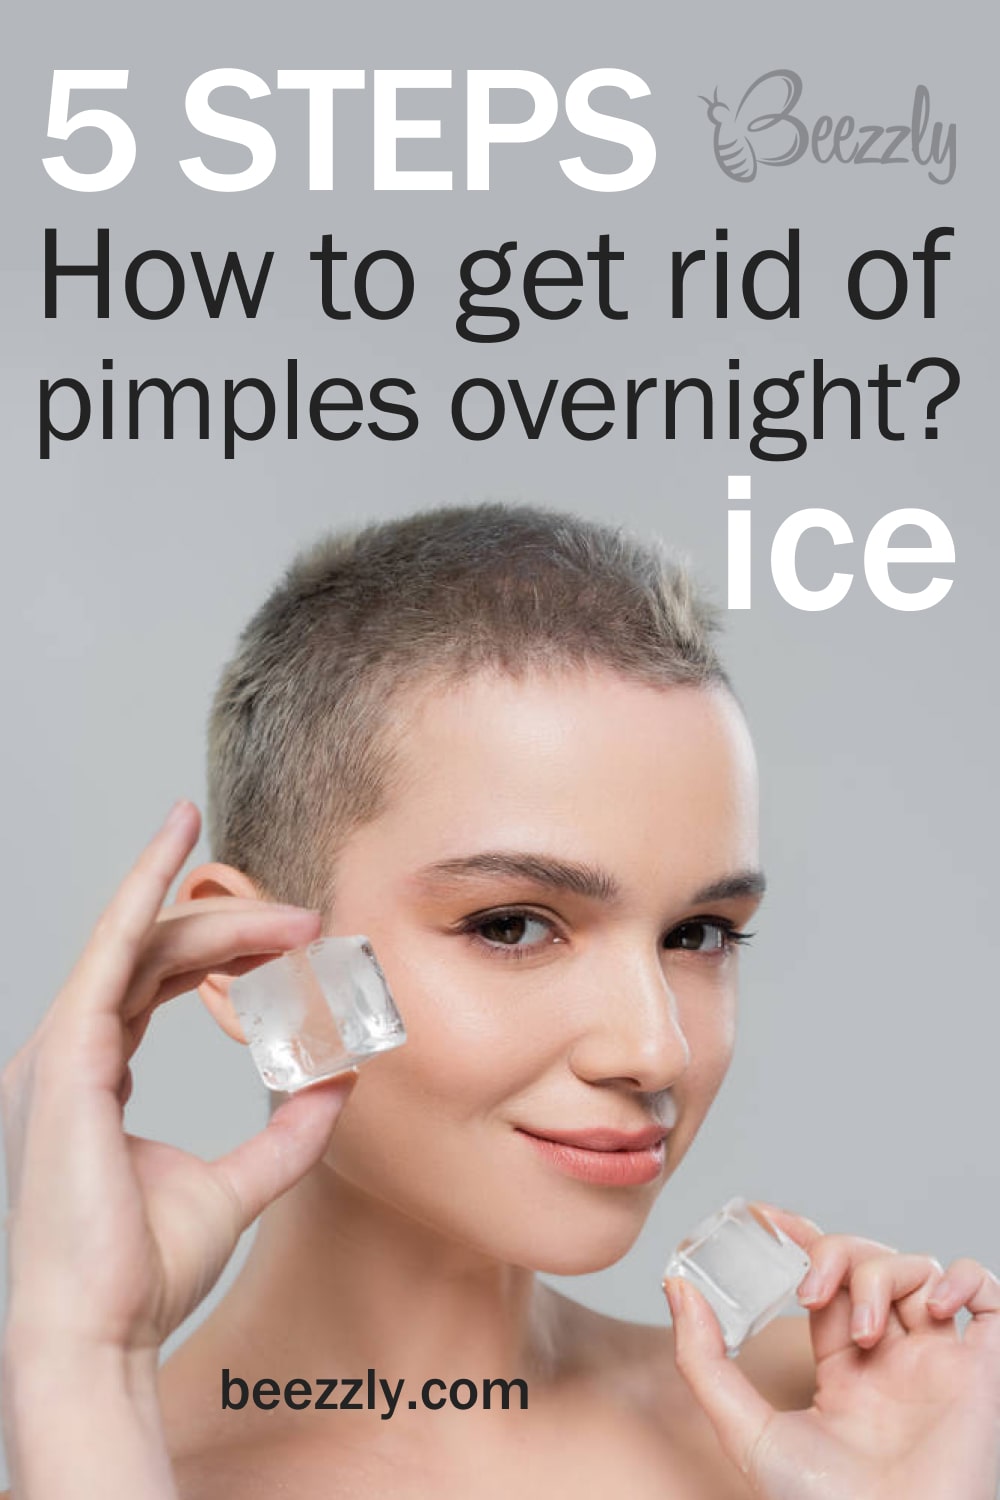 How Do I Get Rid of Pimples On My Skin Overnight With Ice